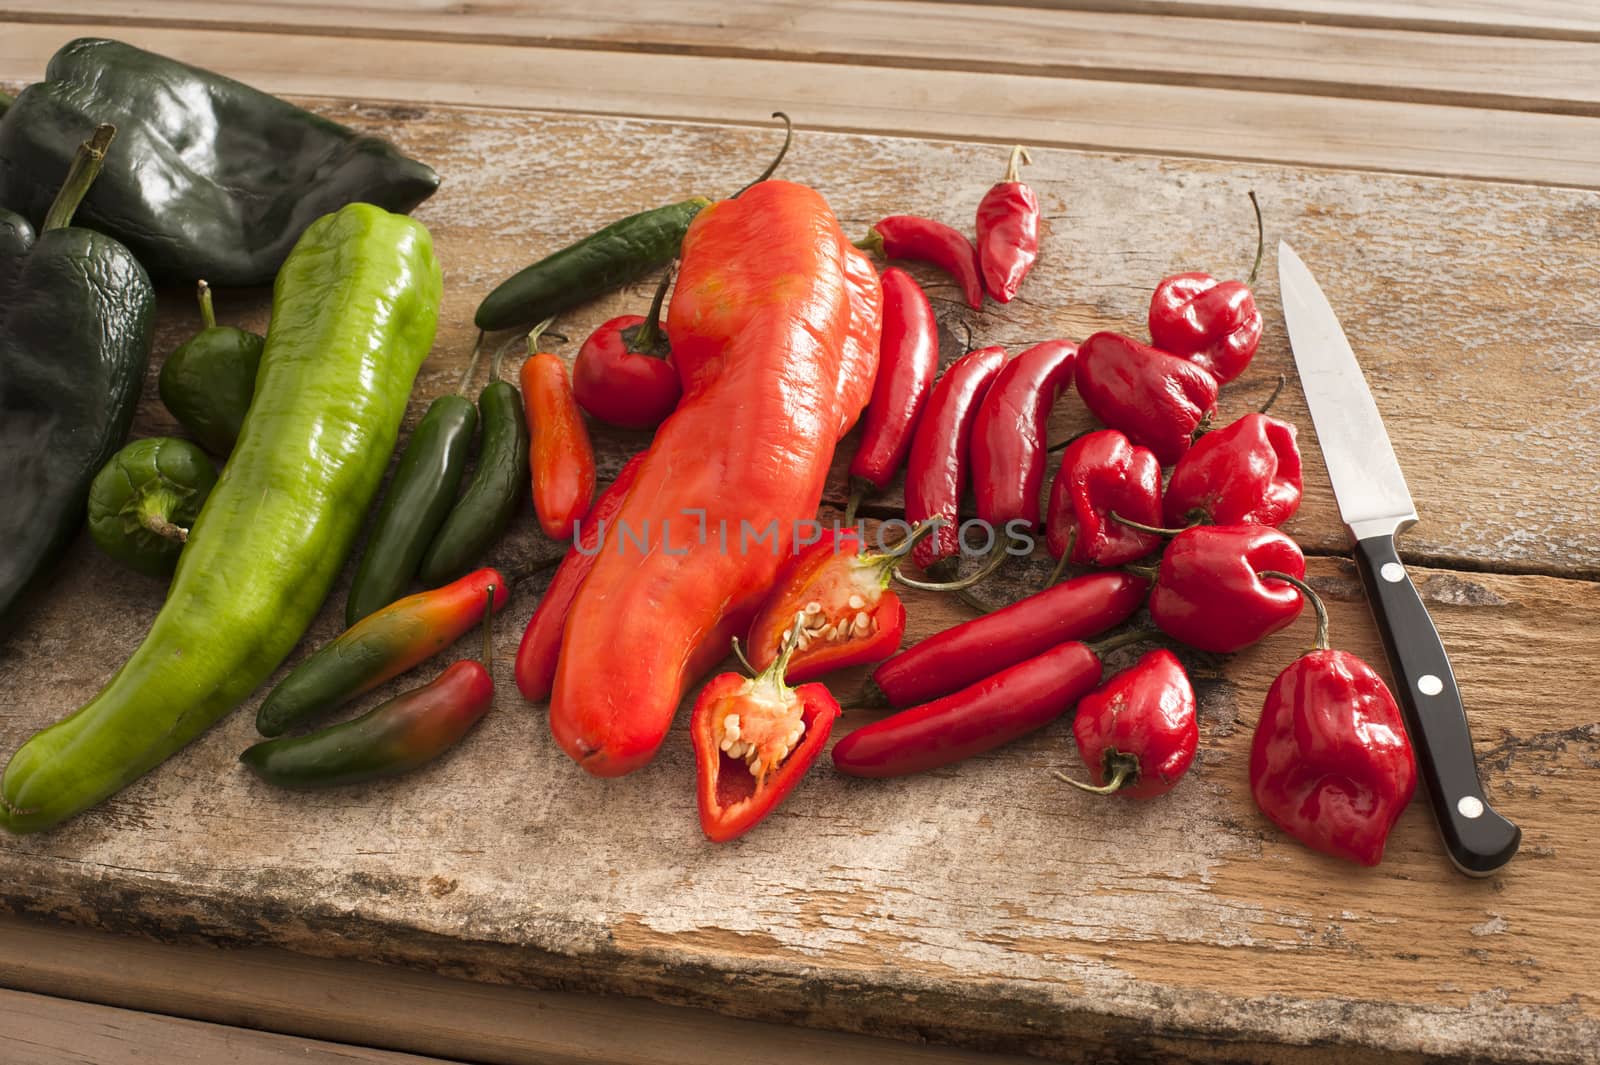 Assortment of colorful fresh red and green spicy chili peppers on an old rustic wooden table with a kitchen knife